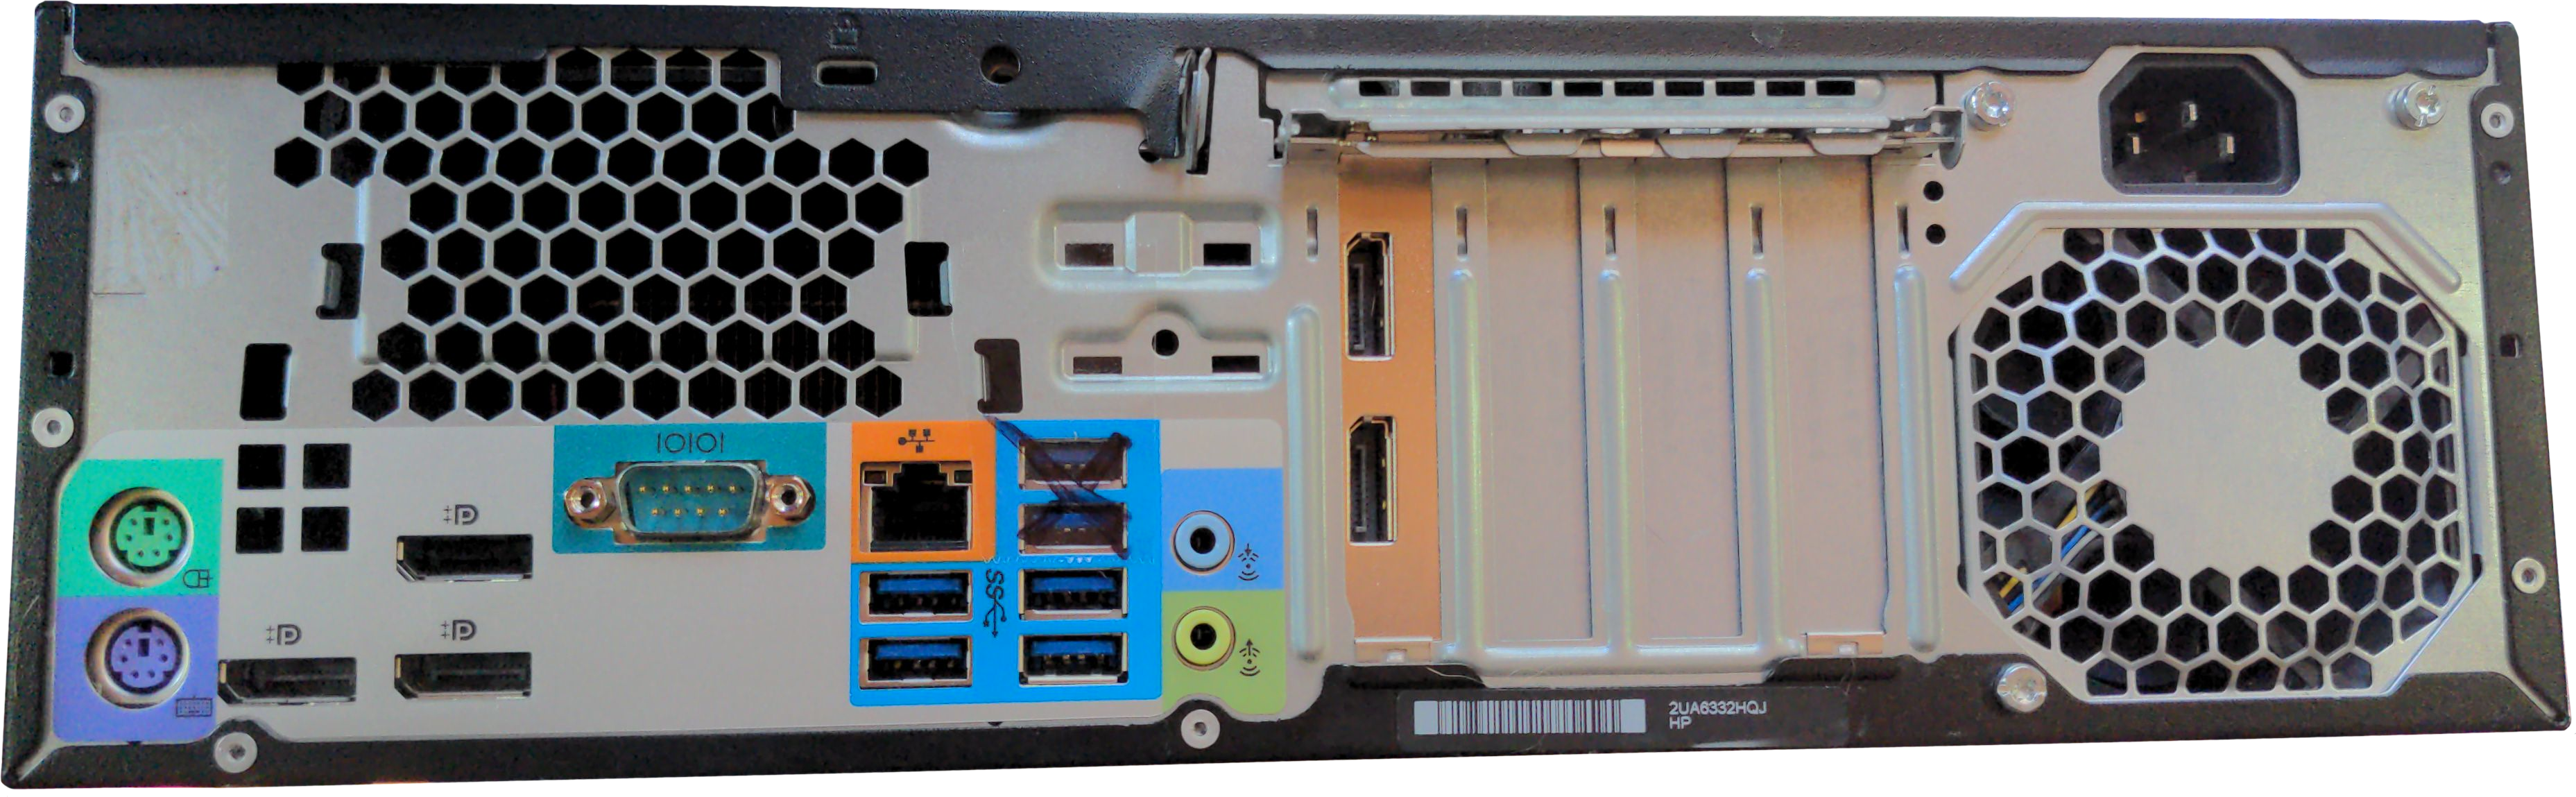 Back of this HP Z240